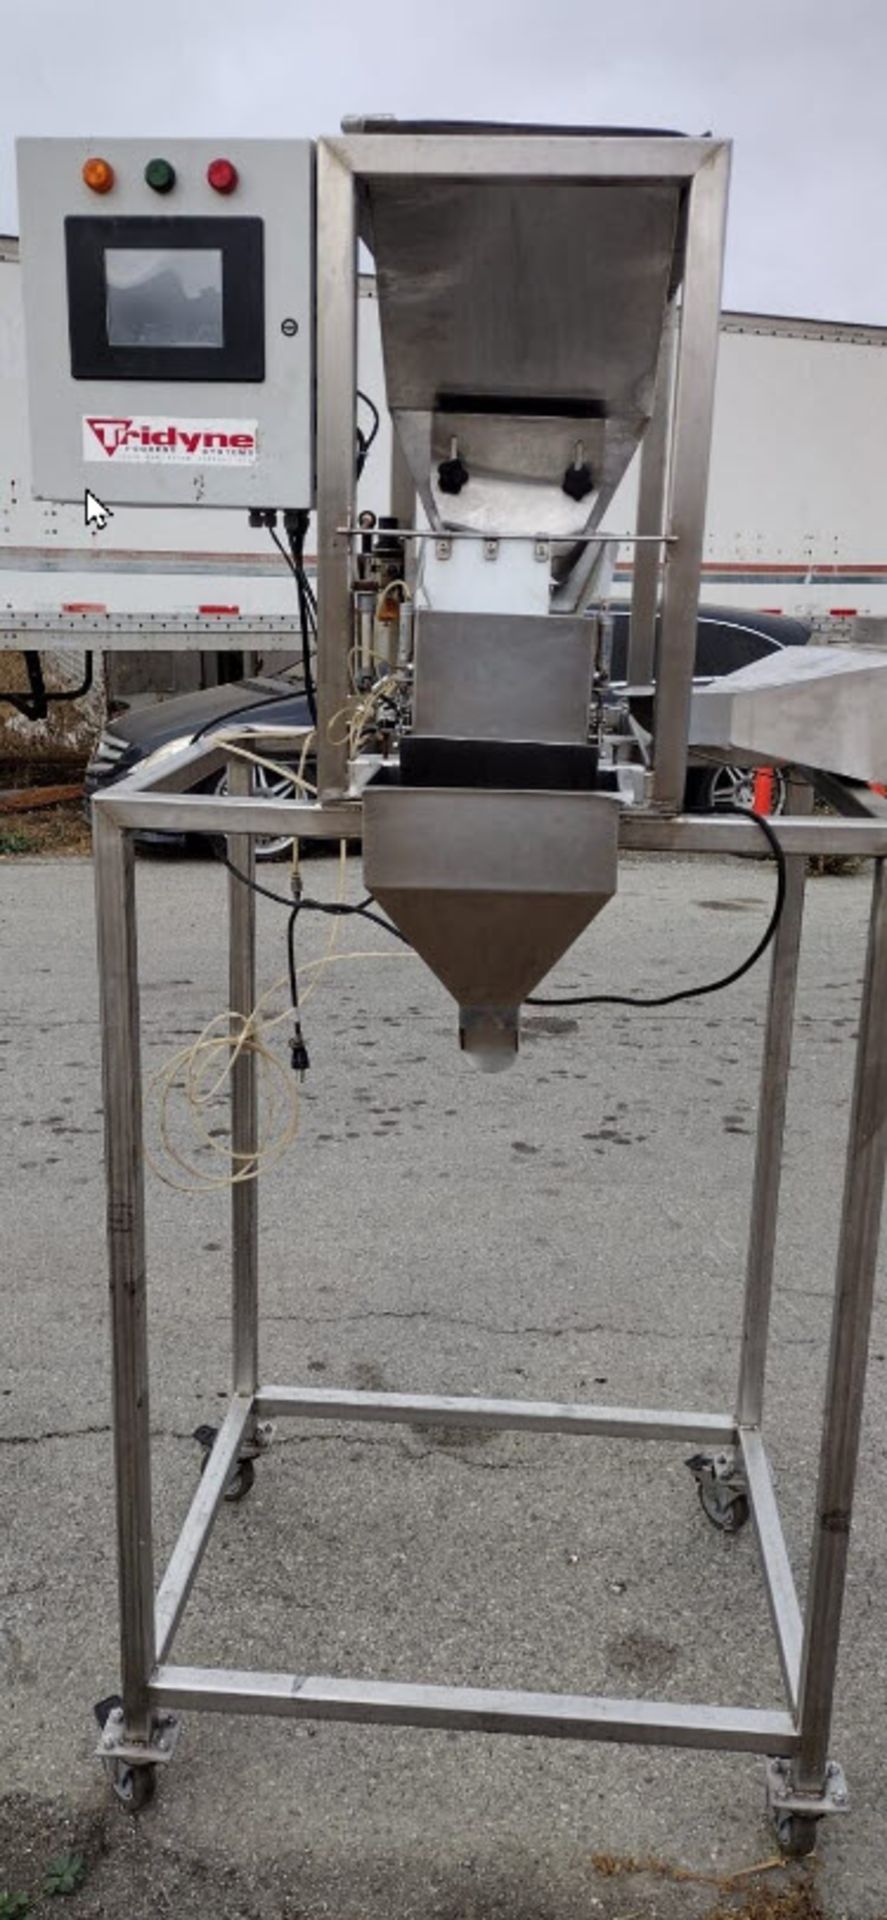 (Located in Hollister, CA) Tridyne Vibratory Feeder System Model F-100 Style, Rigging Fee: $100 - Image 2 of 6